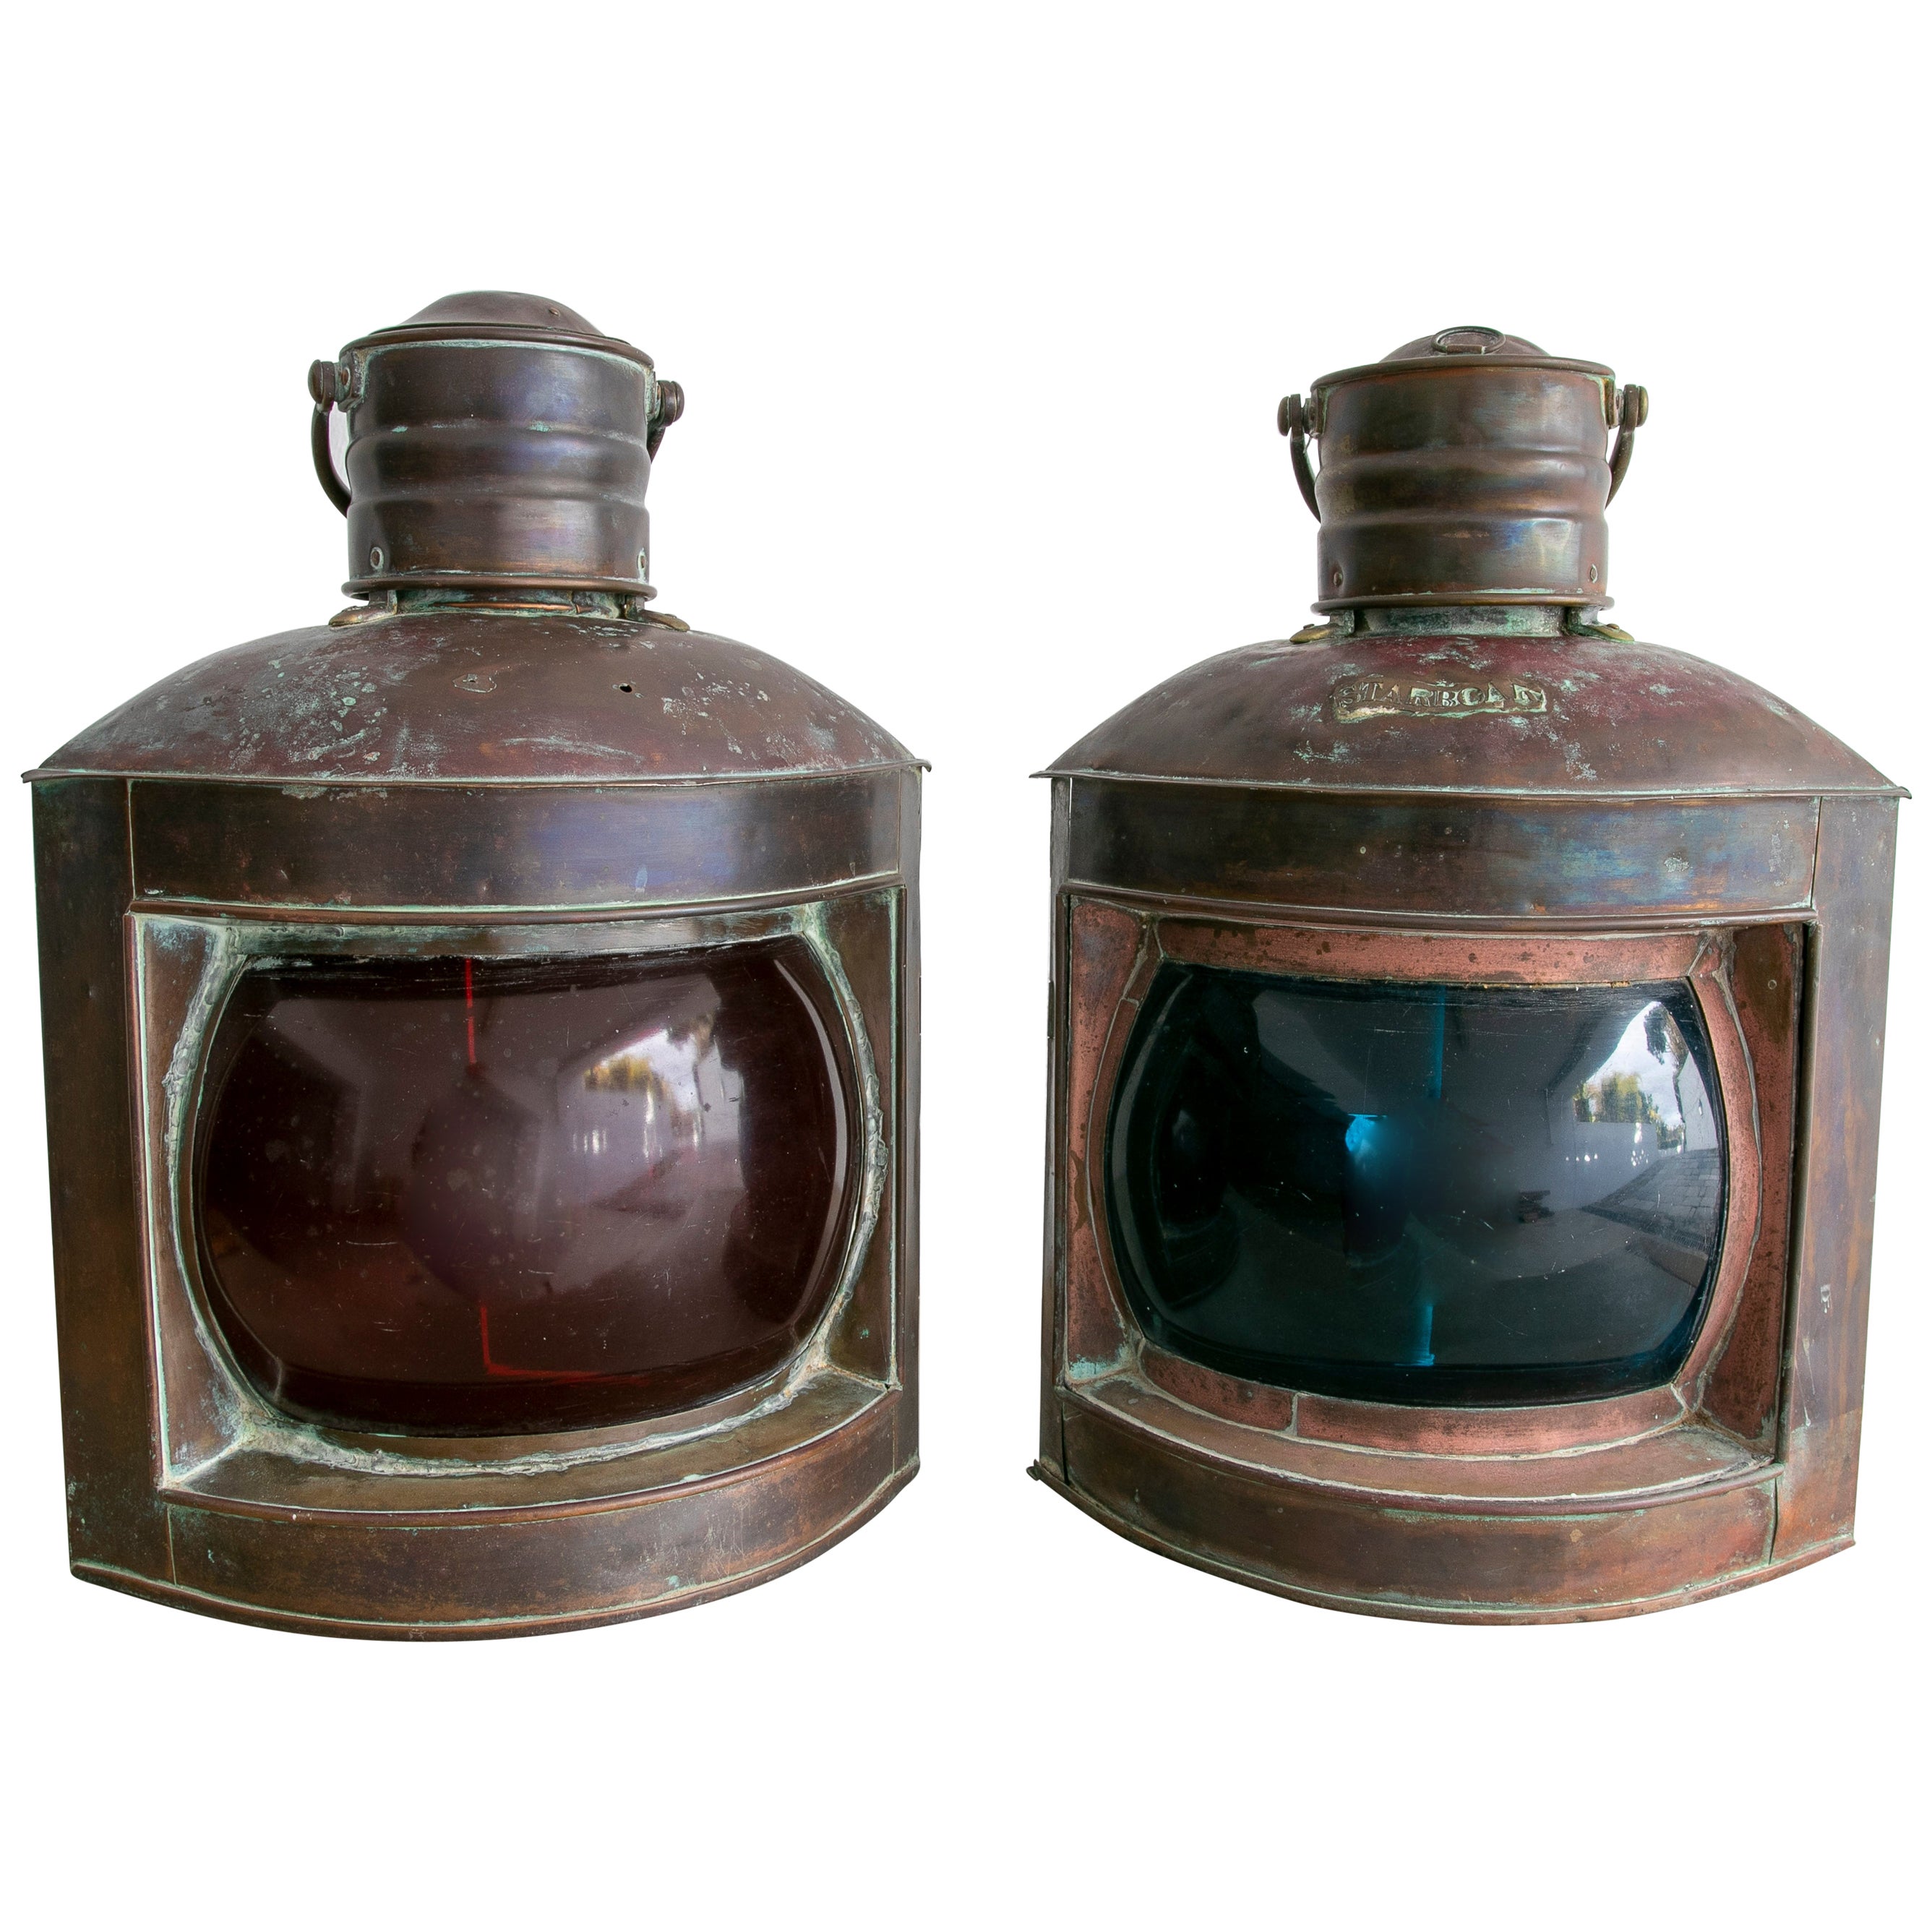 Pair of Brass Port and Starboard Ship Lanterns with Fresnel Lenses. NY, C. 1900